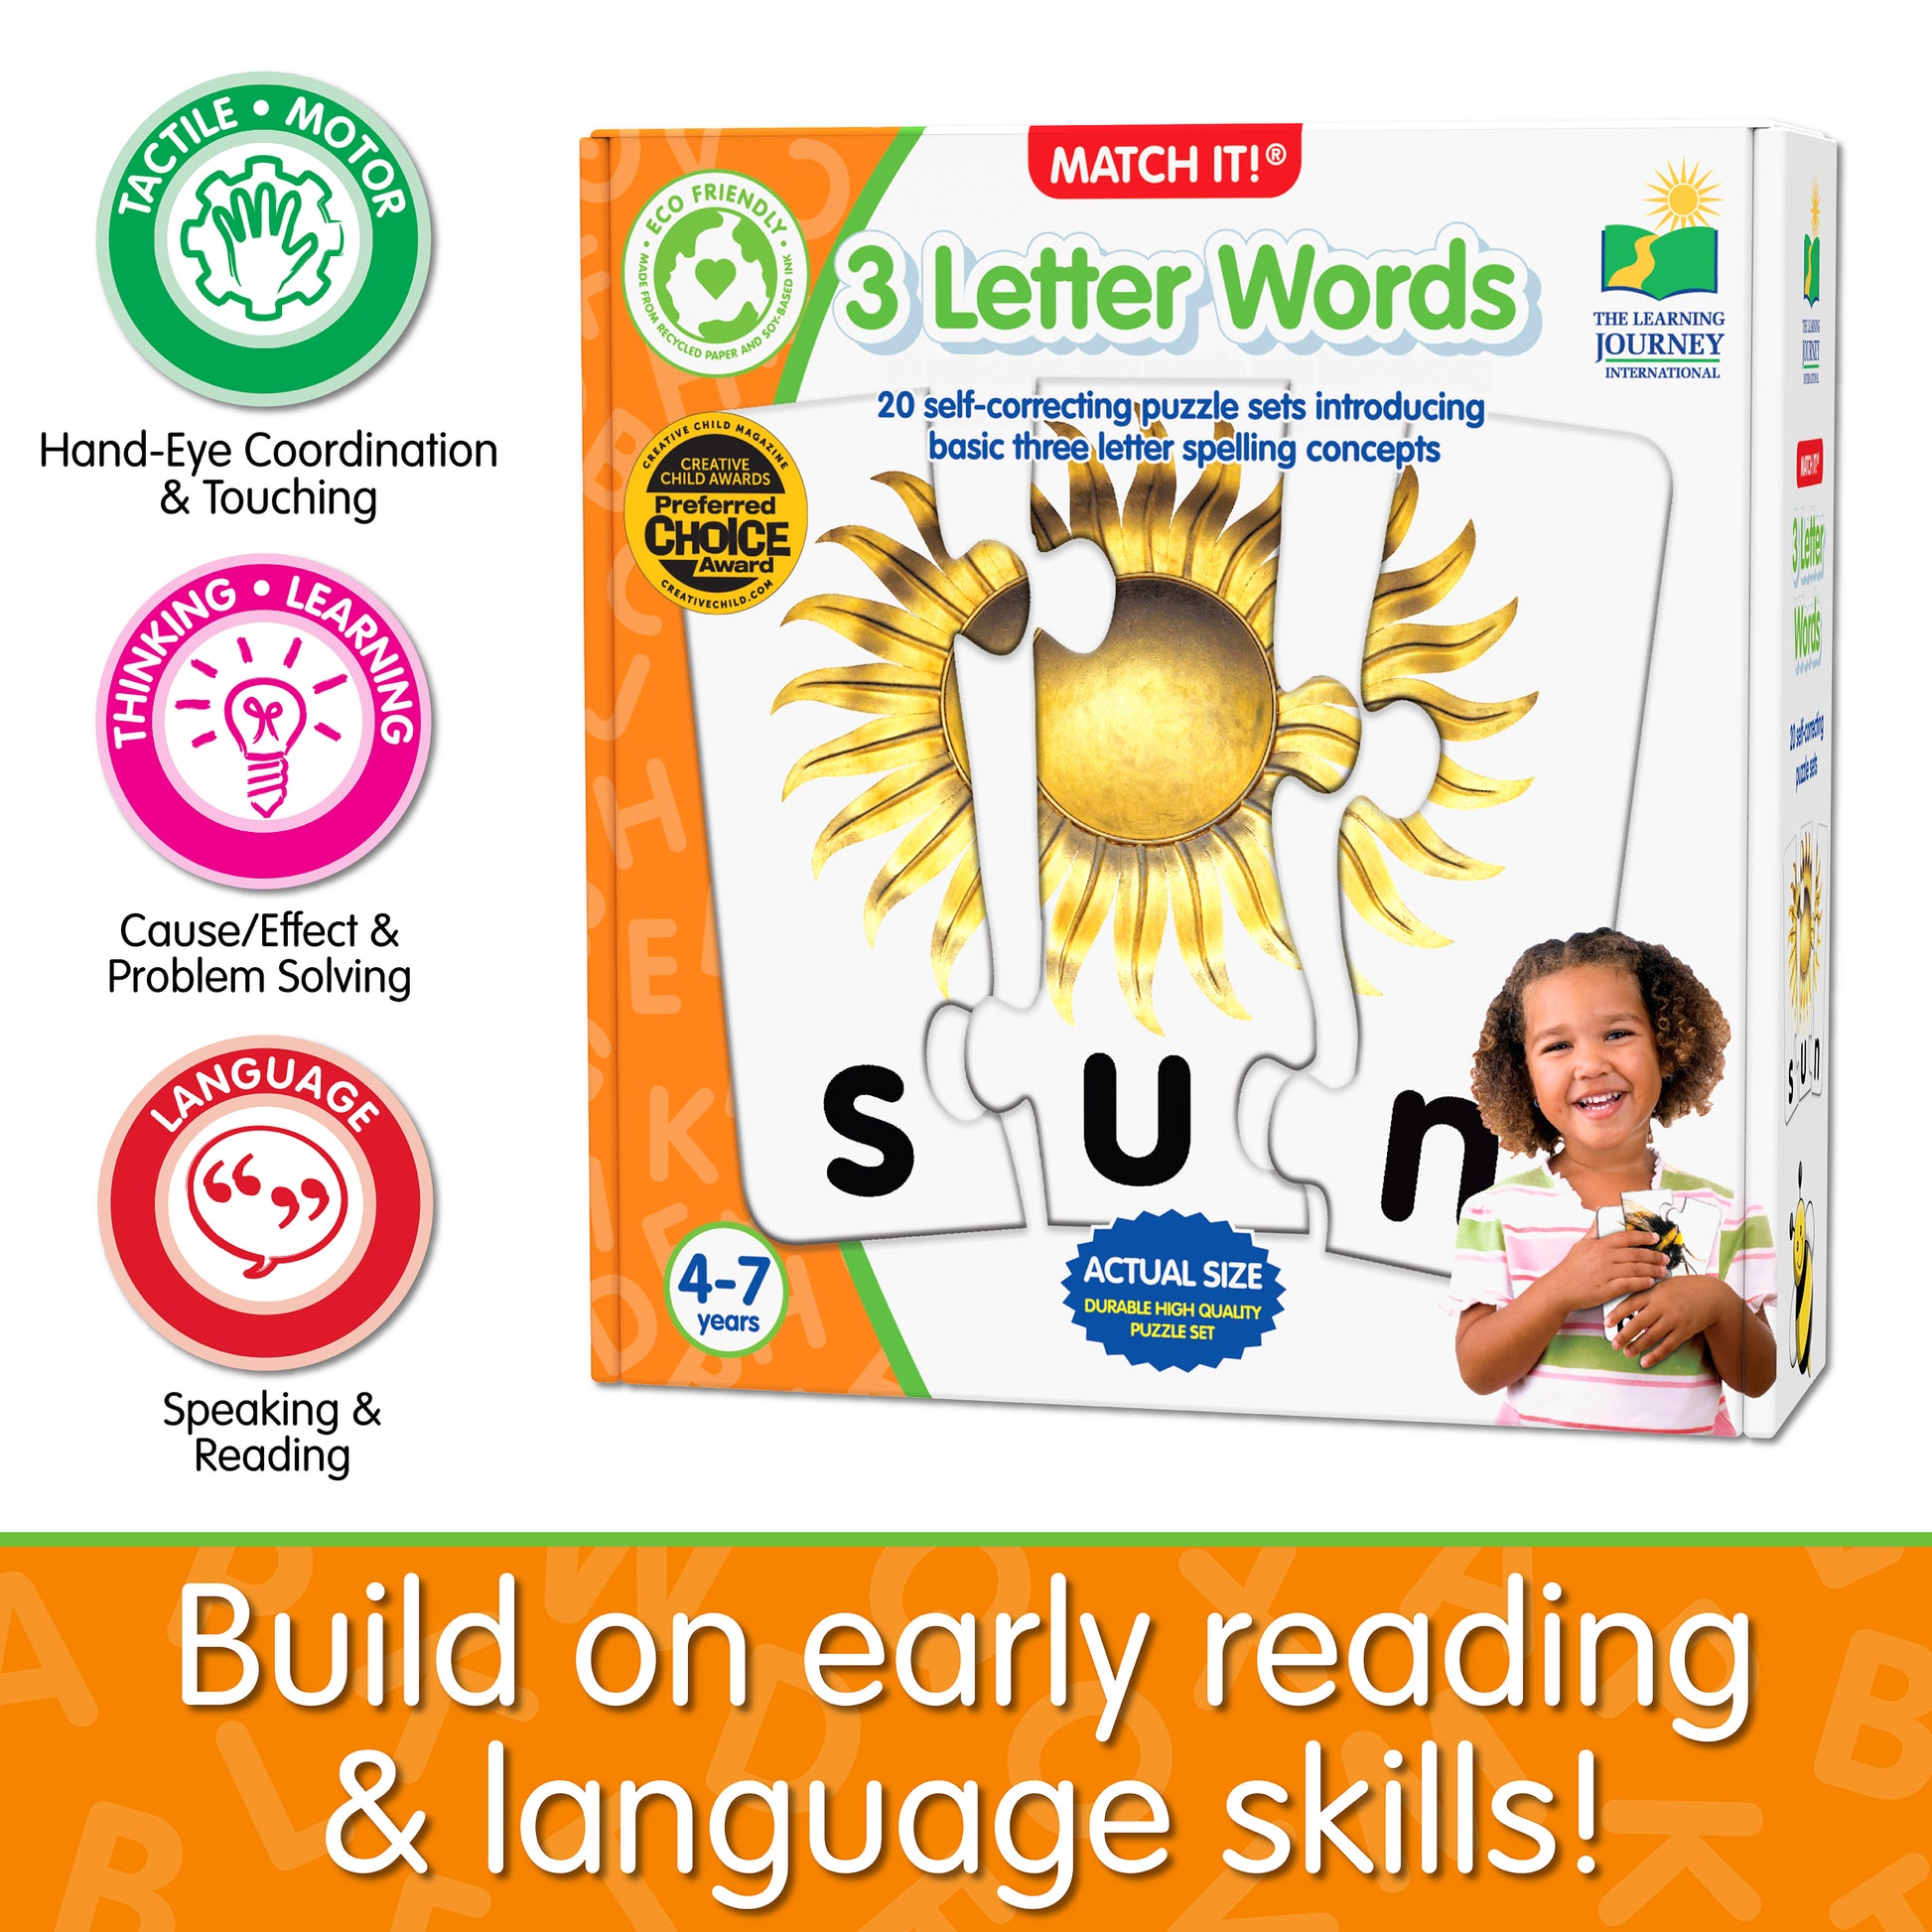 Infographic about Match It - 3 Letter Words' educational benefits that says, "Build on early reading and language skills!"